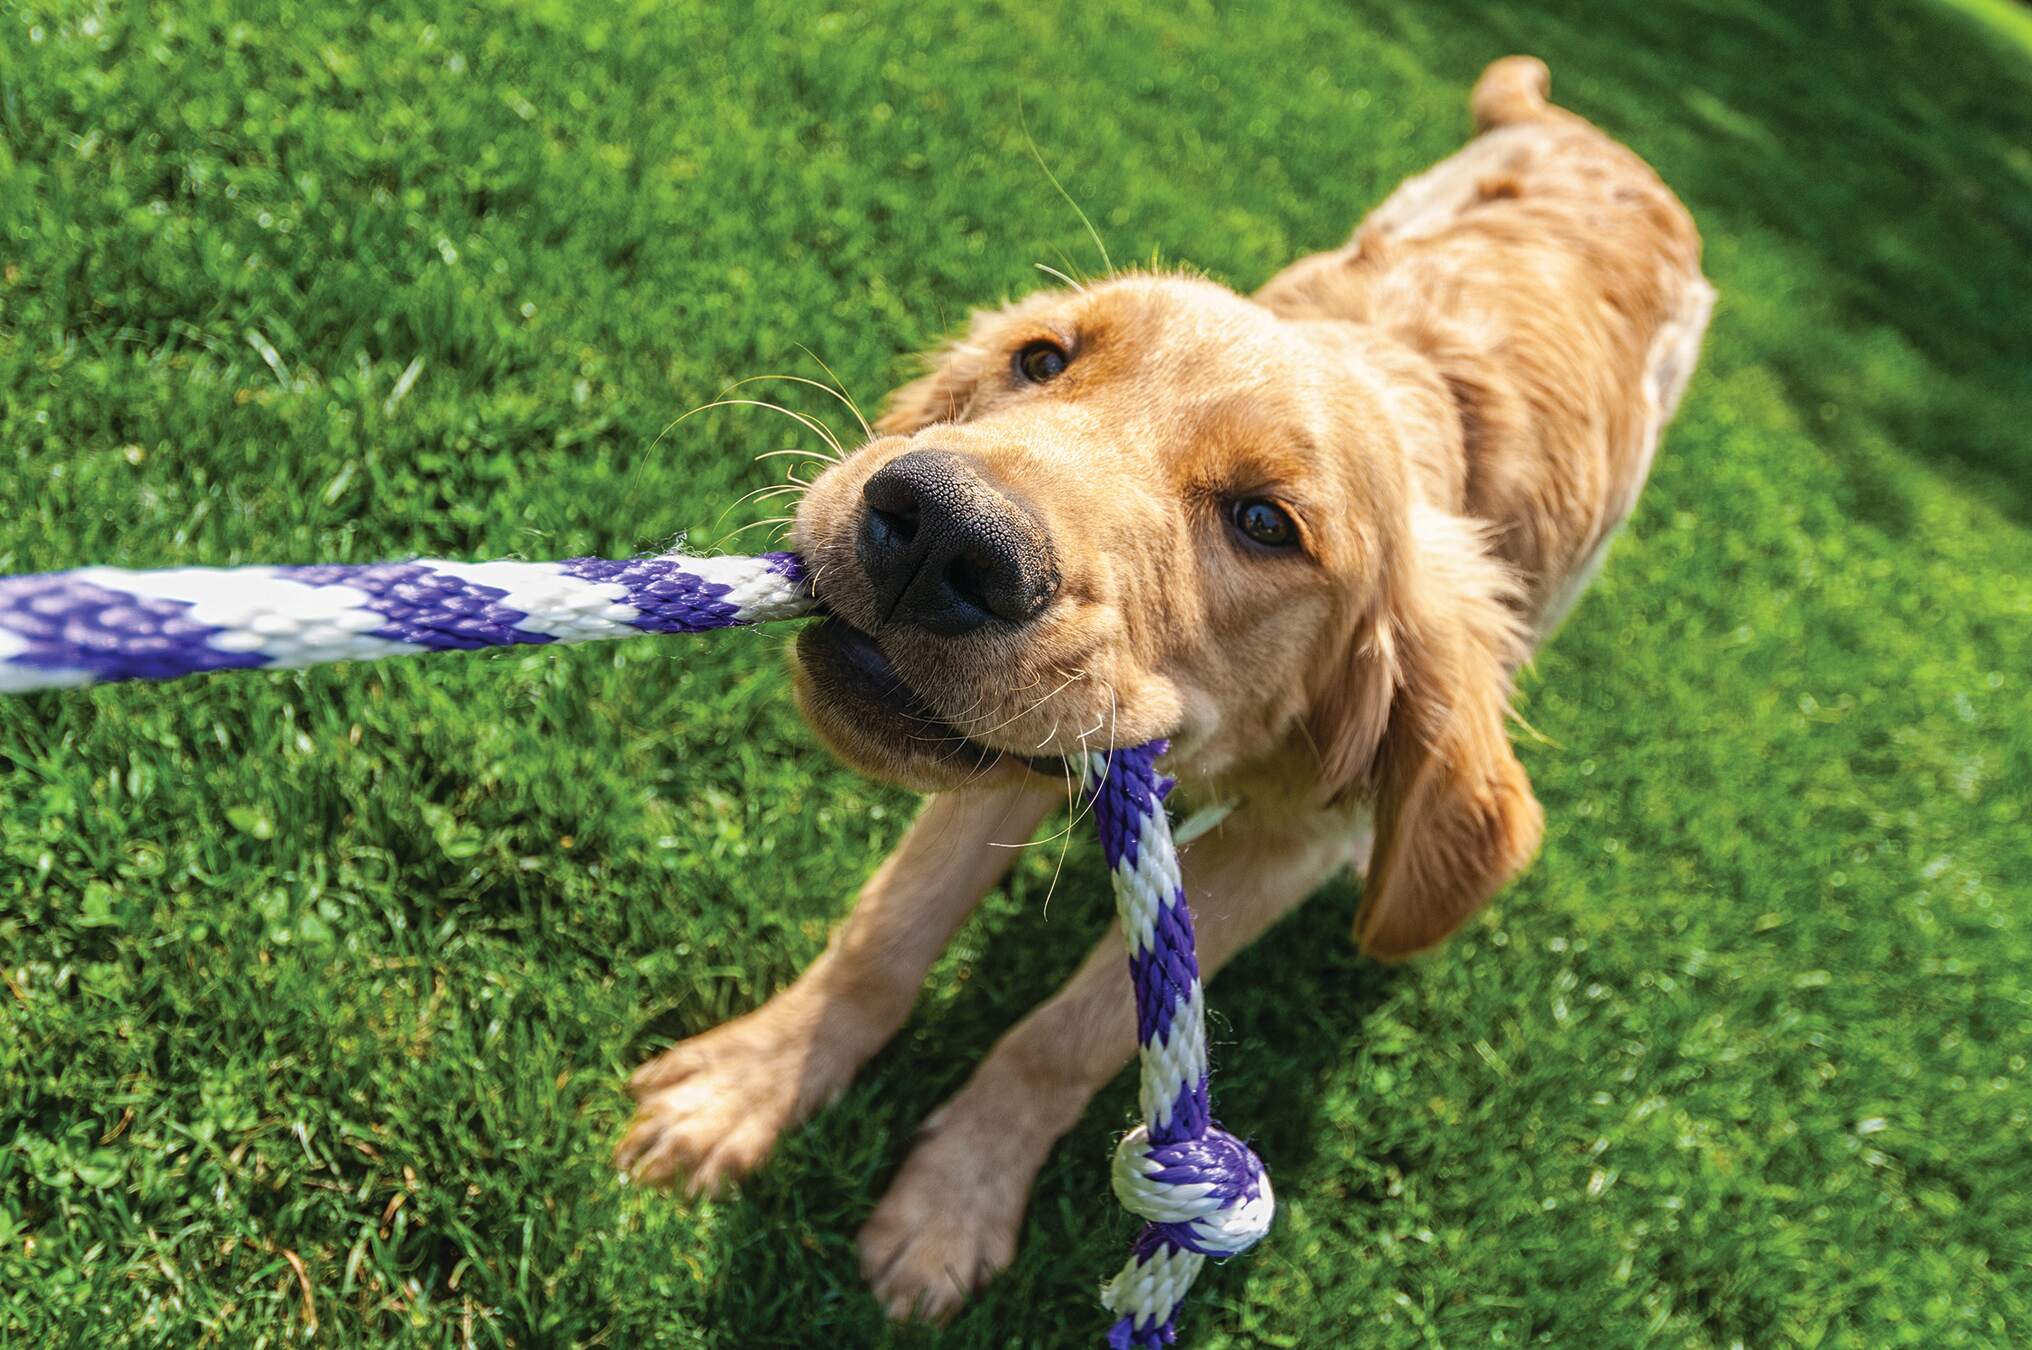 Puppy golden retriever with a blue and white rope in its mouth playing tug-of-war on grass. He is looking right at the camera and has a grin on his face.